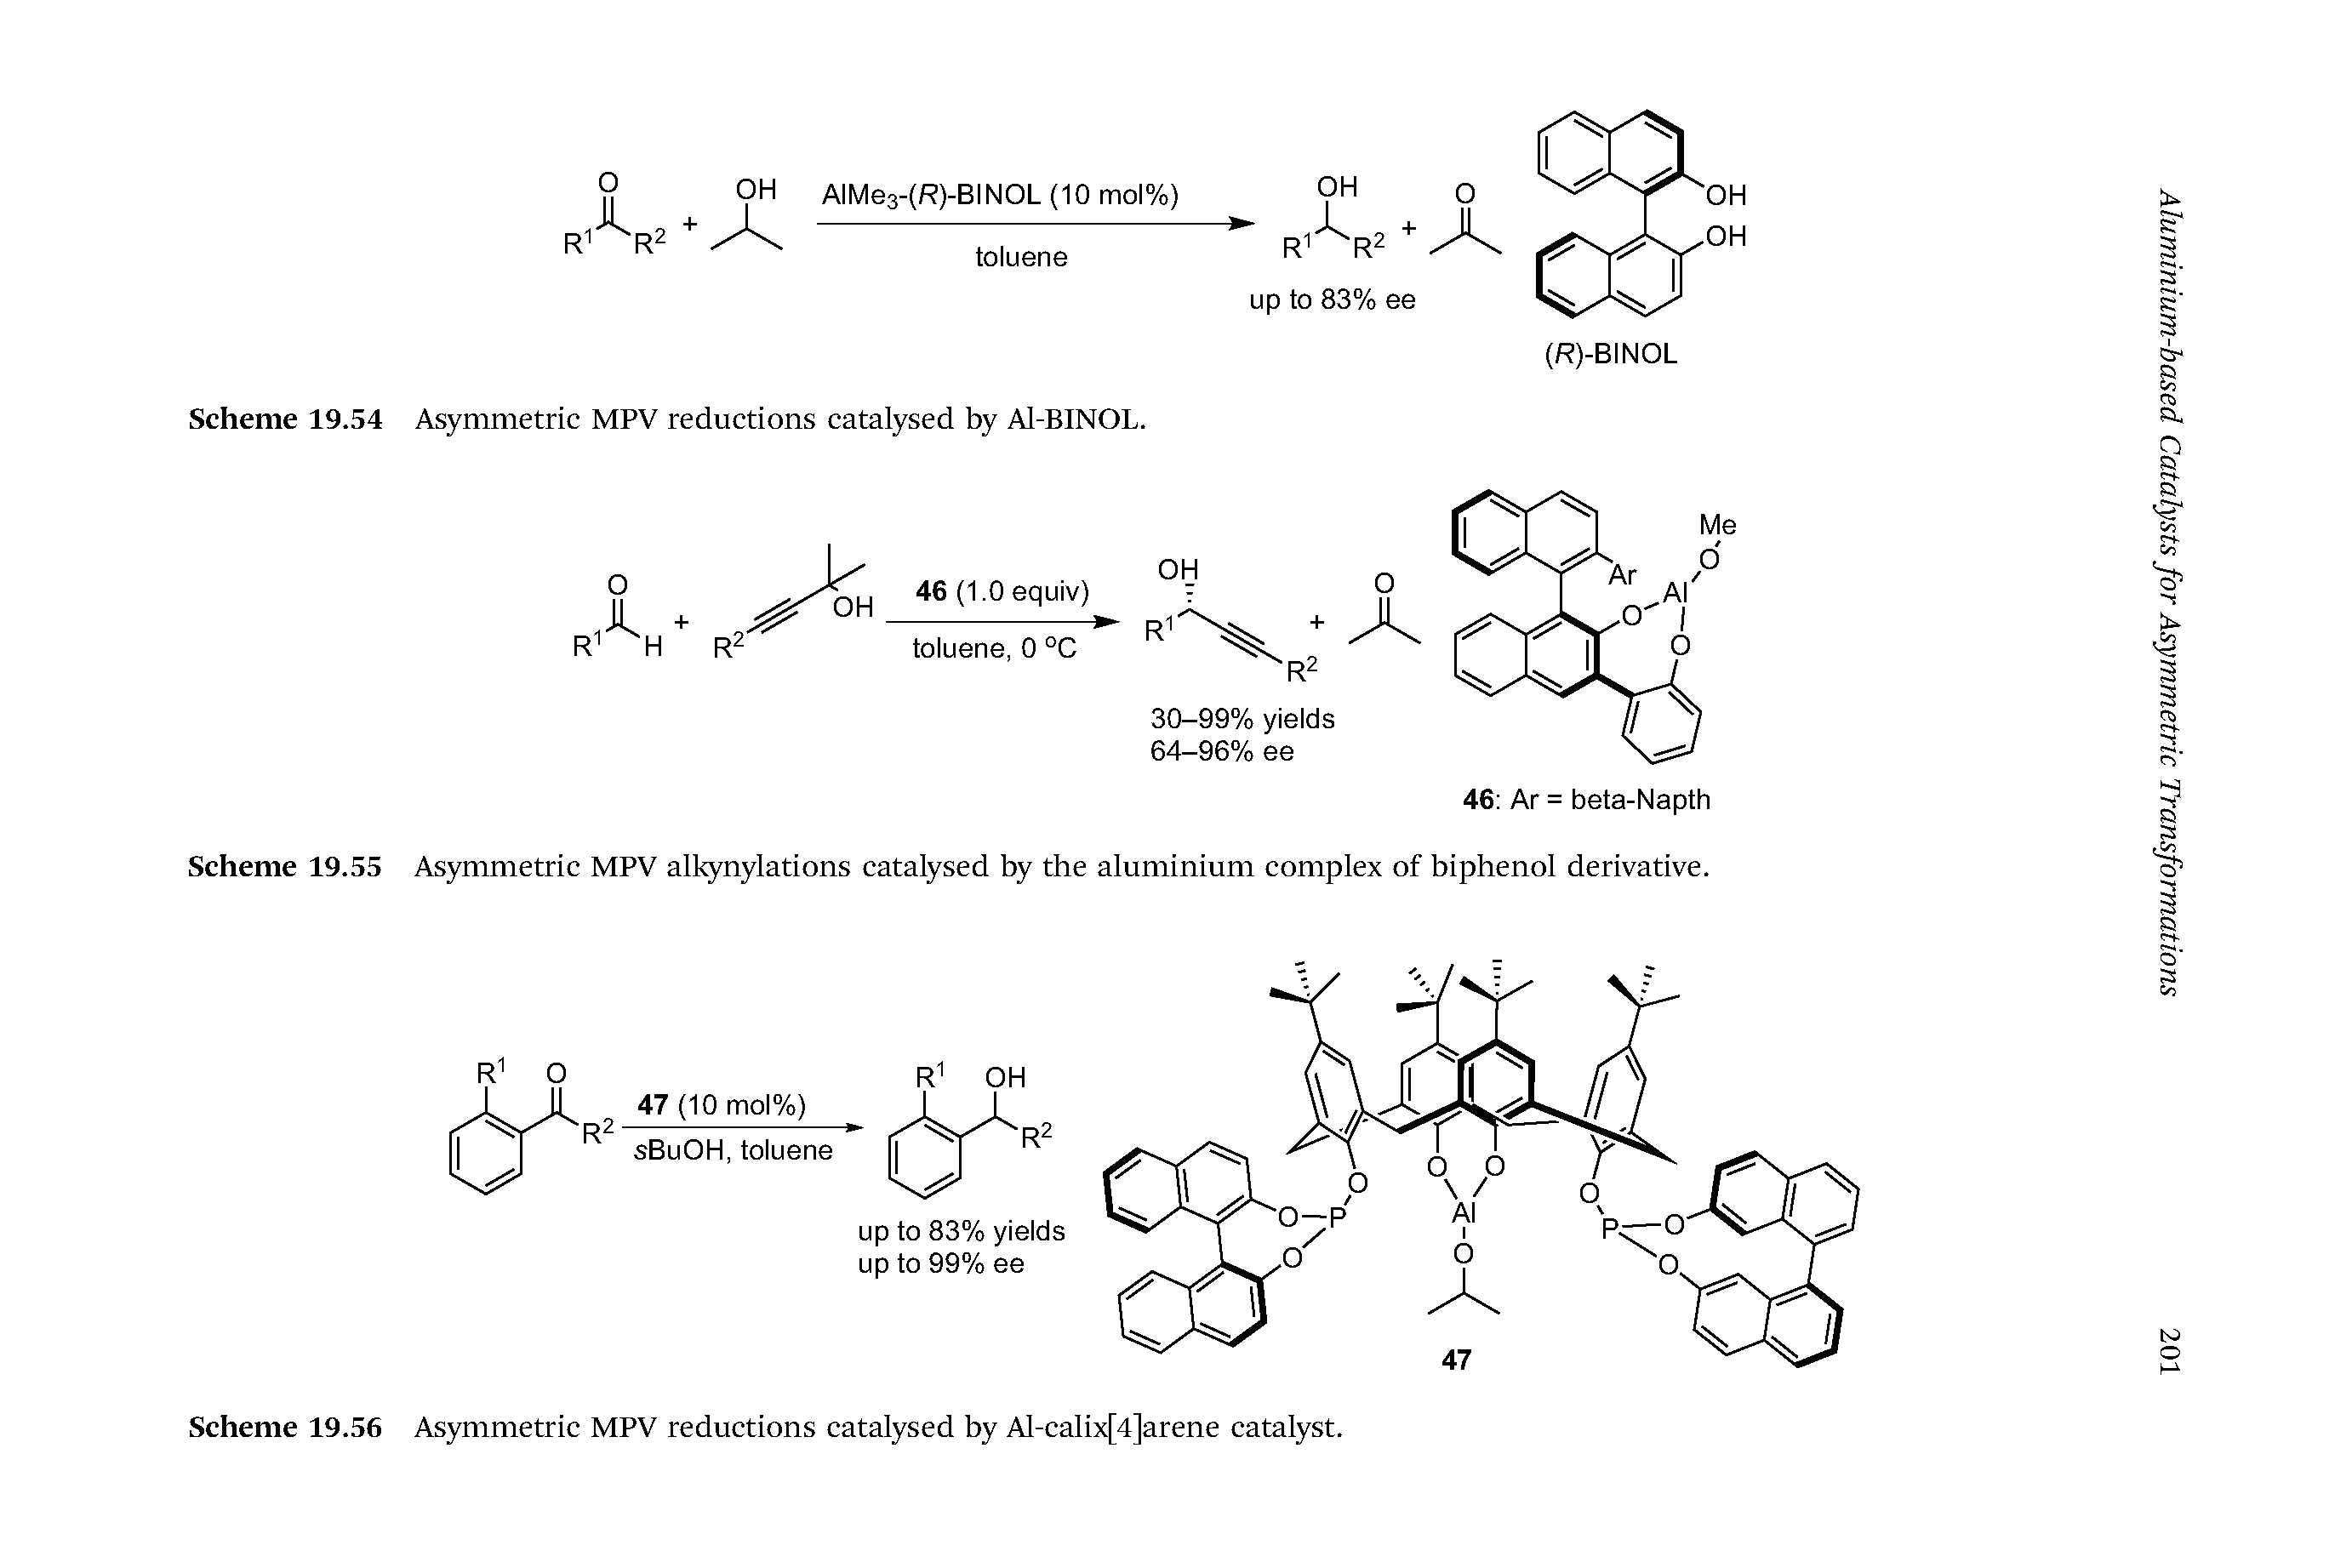 Scheme 19.56 Asymmetric MPV reductions catalysed by Al-calix[4]arene catalyst.